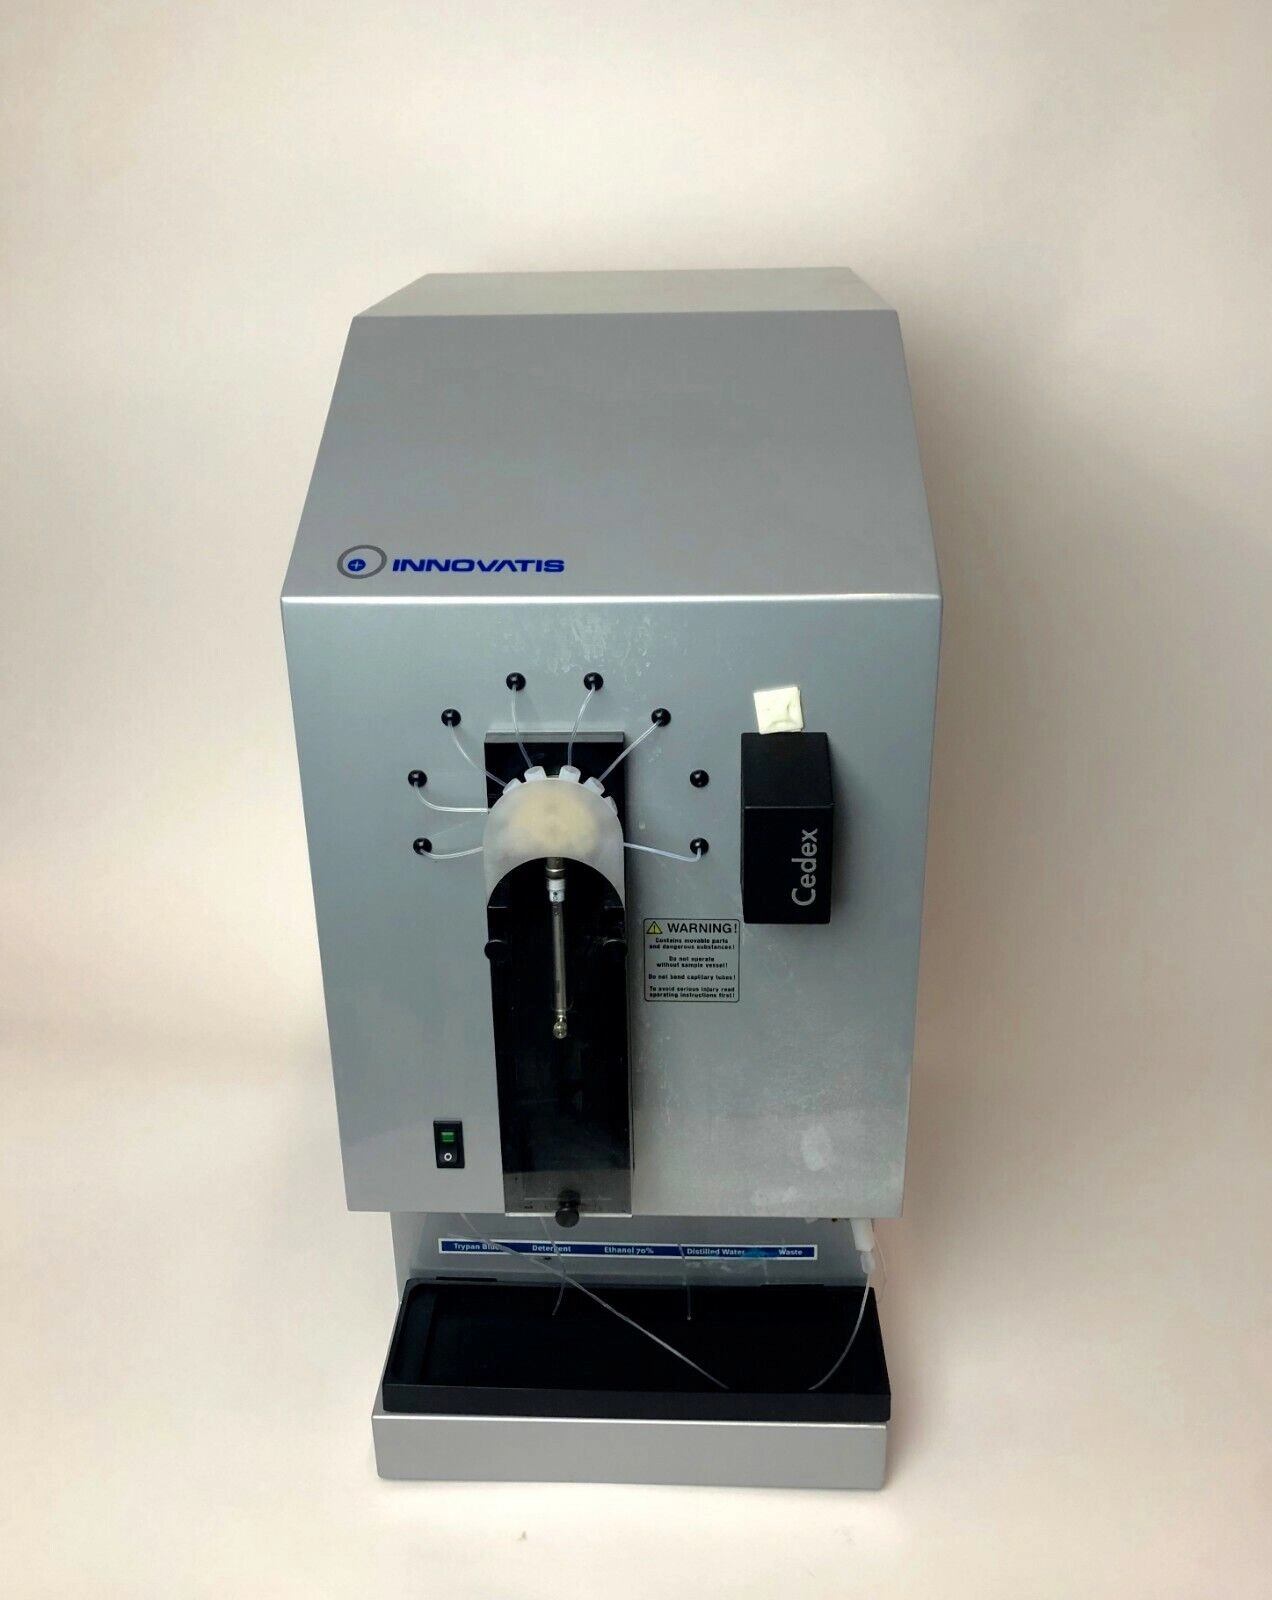 Innovatis Cedex Automated Cell Counting System